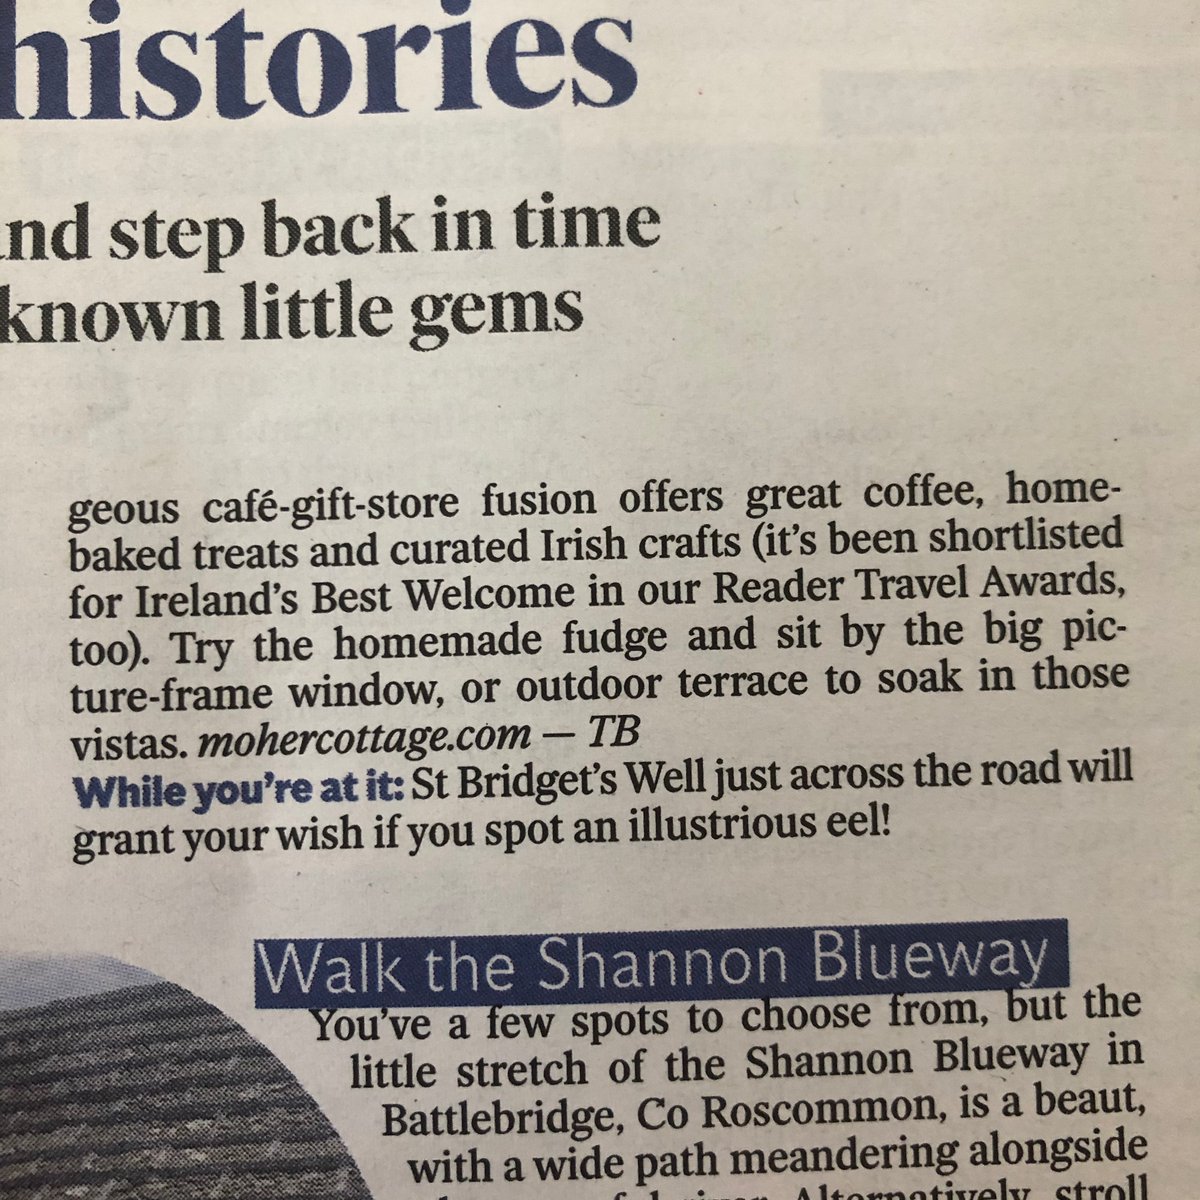 So delighted to be on the fabulous and inspiring list of Summer hot 100 for our Irish staycations in today’s @IndoWeekend in @Independent_ie 
Thanks so much the @Indo_Travel_  @ThomBreathnach 
Looking forward to welcoming folks #whenwetravelagain on Monday #visitclare  #theBurren